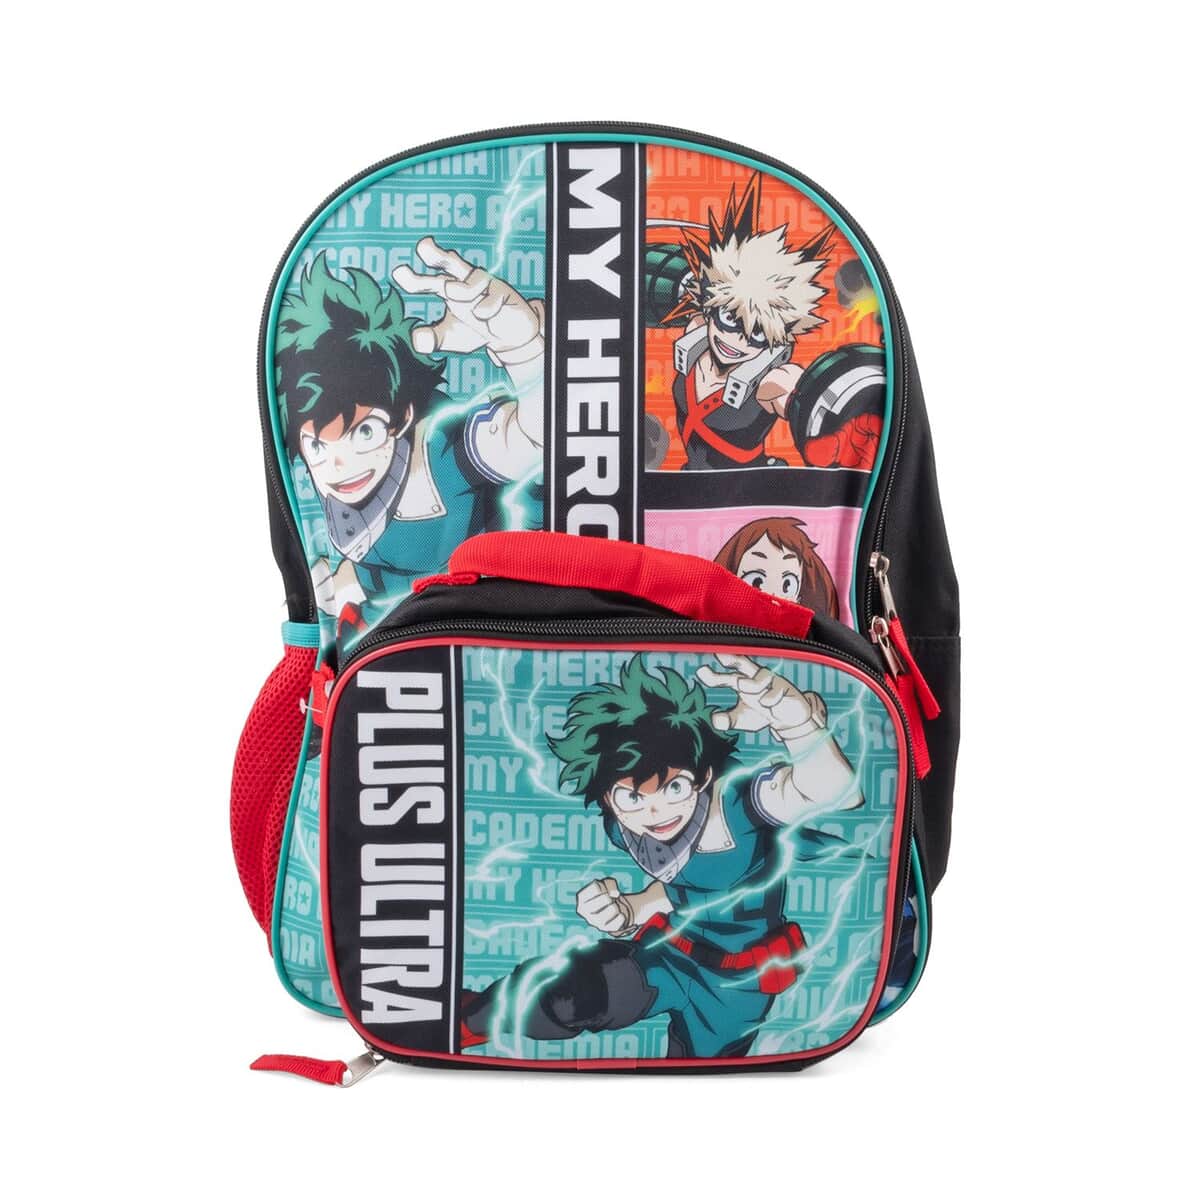 My Hero Academia Backpack with Lunch Bag image number 6